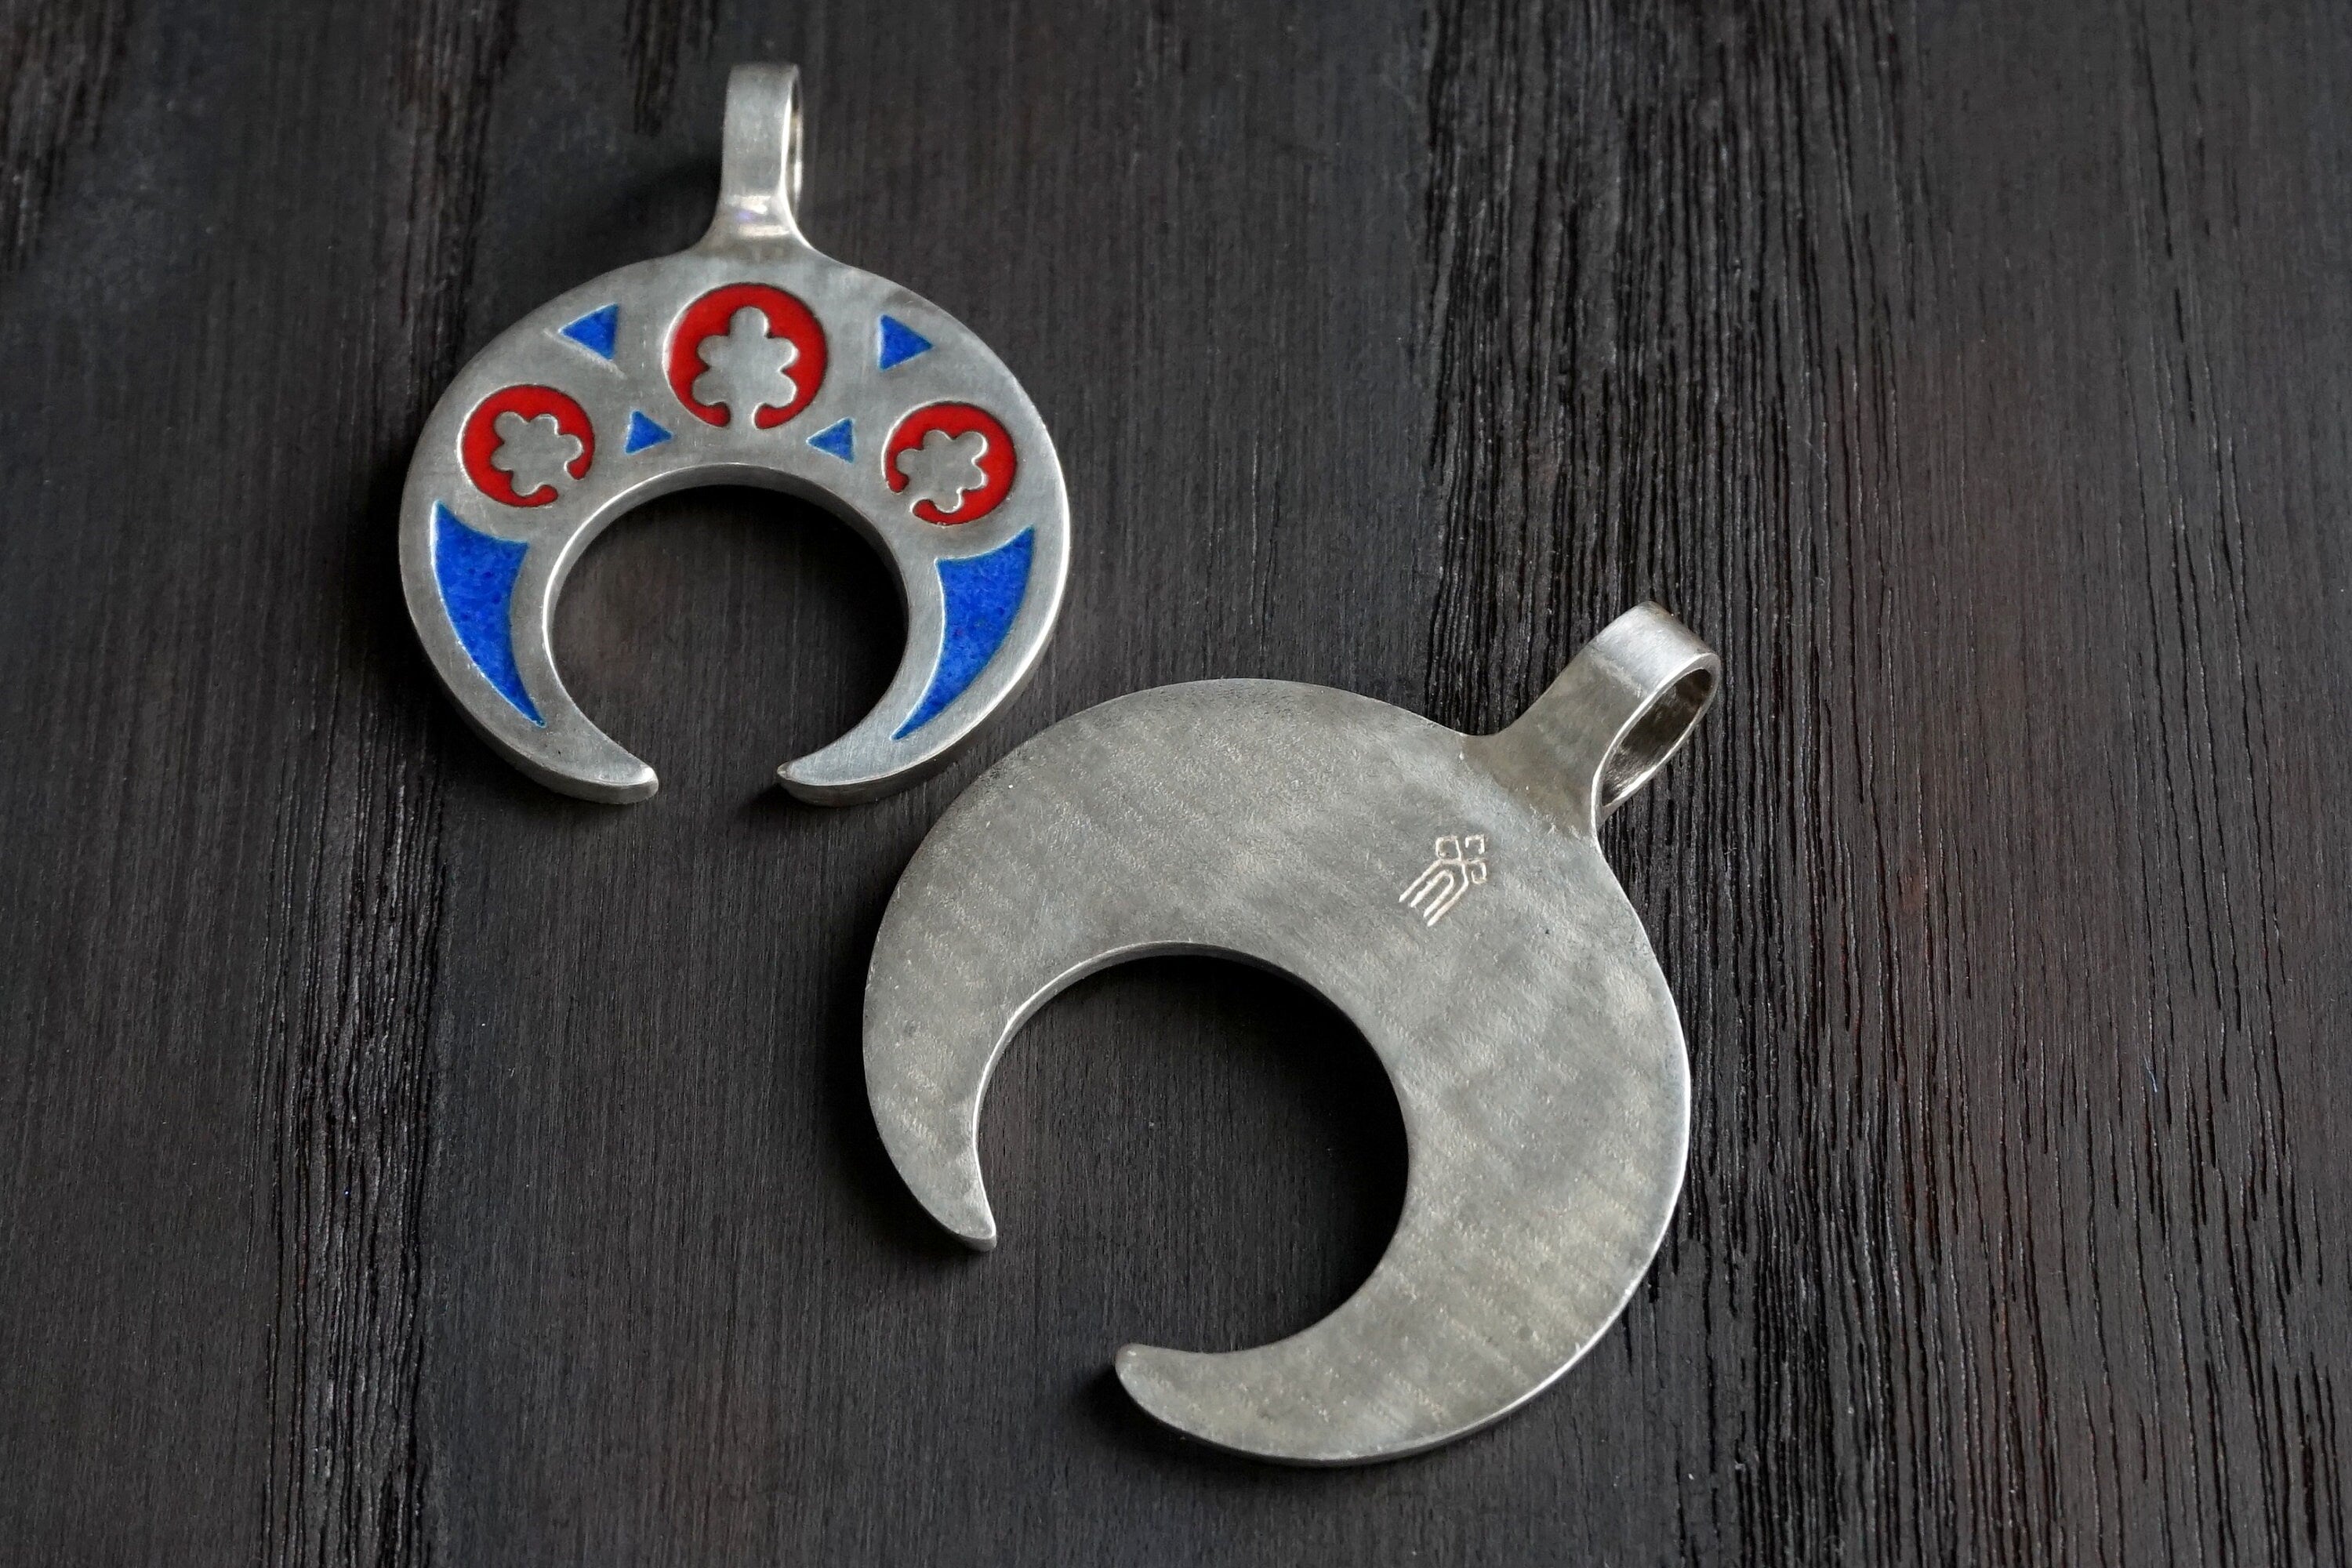 Replica of a Slavic Lunula amulet (available in 2 sizes)